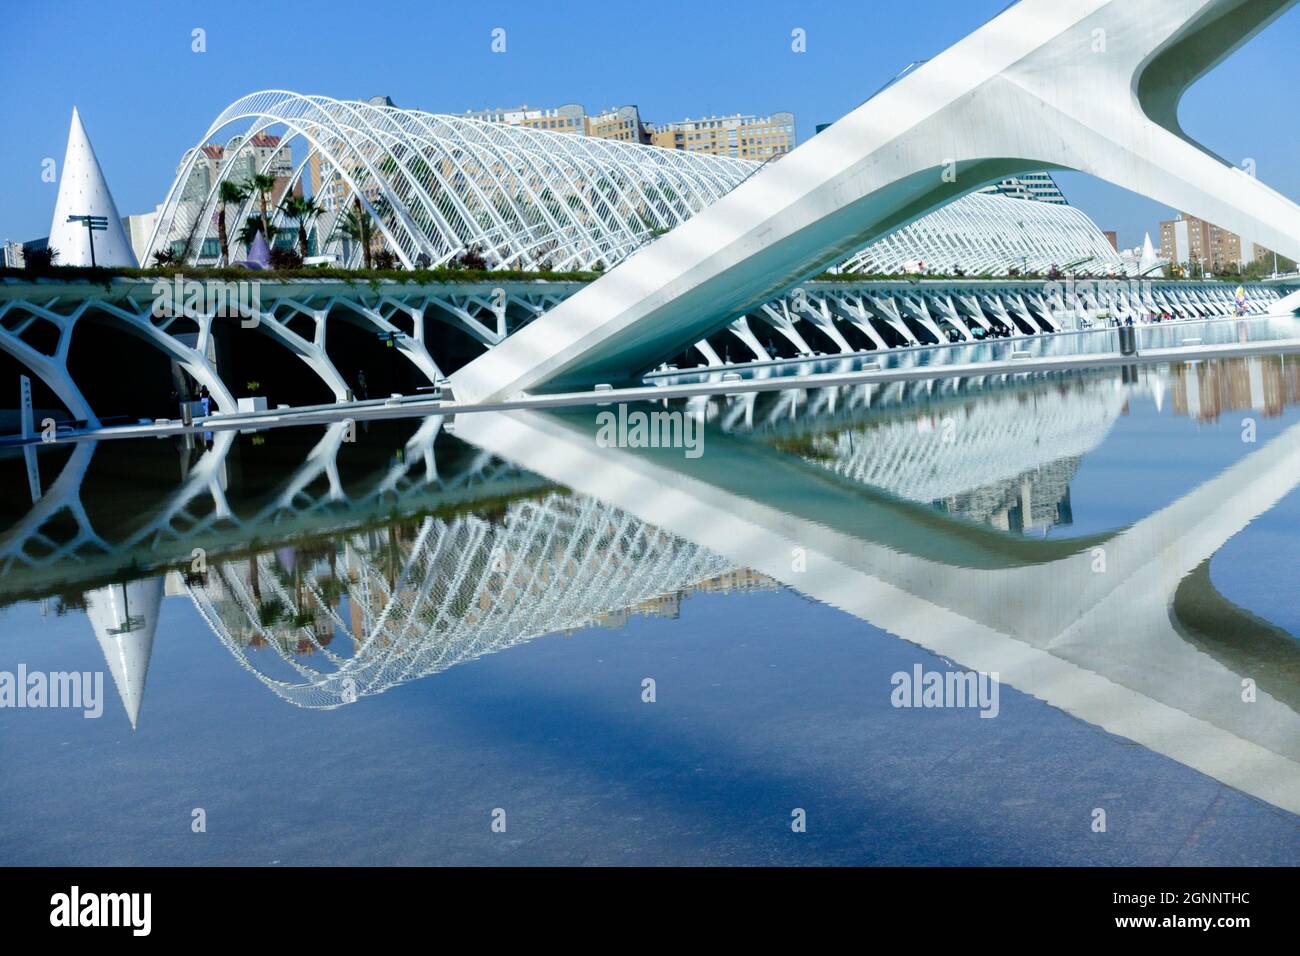 Reflection in water Spain Valencia City of Arts and Sciences Valencia Spain modern architecture by Calatrava Stock Photo